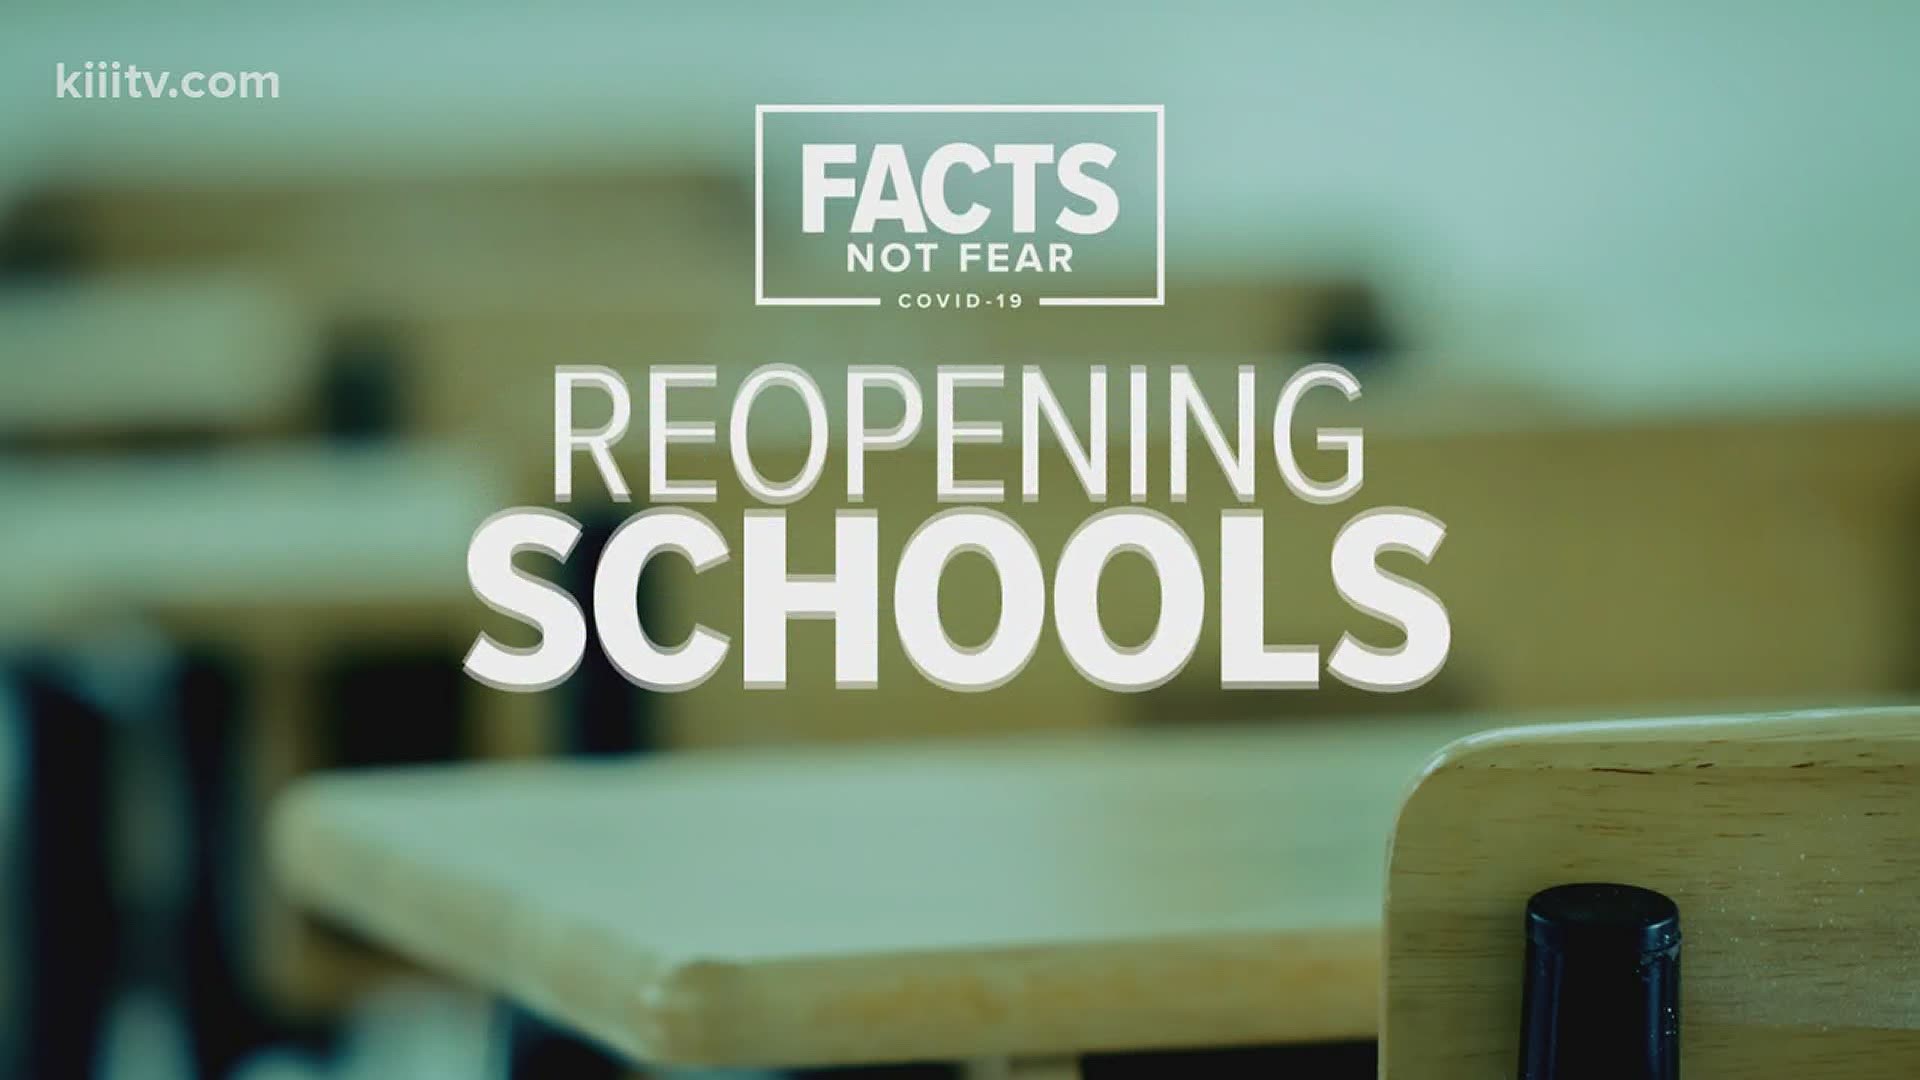 The new reporting system will begin in September when many school districts will begin to allow students to return to the classroom.